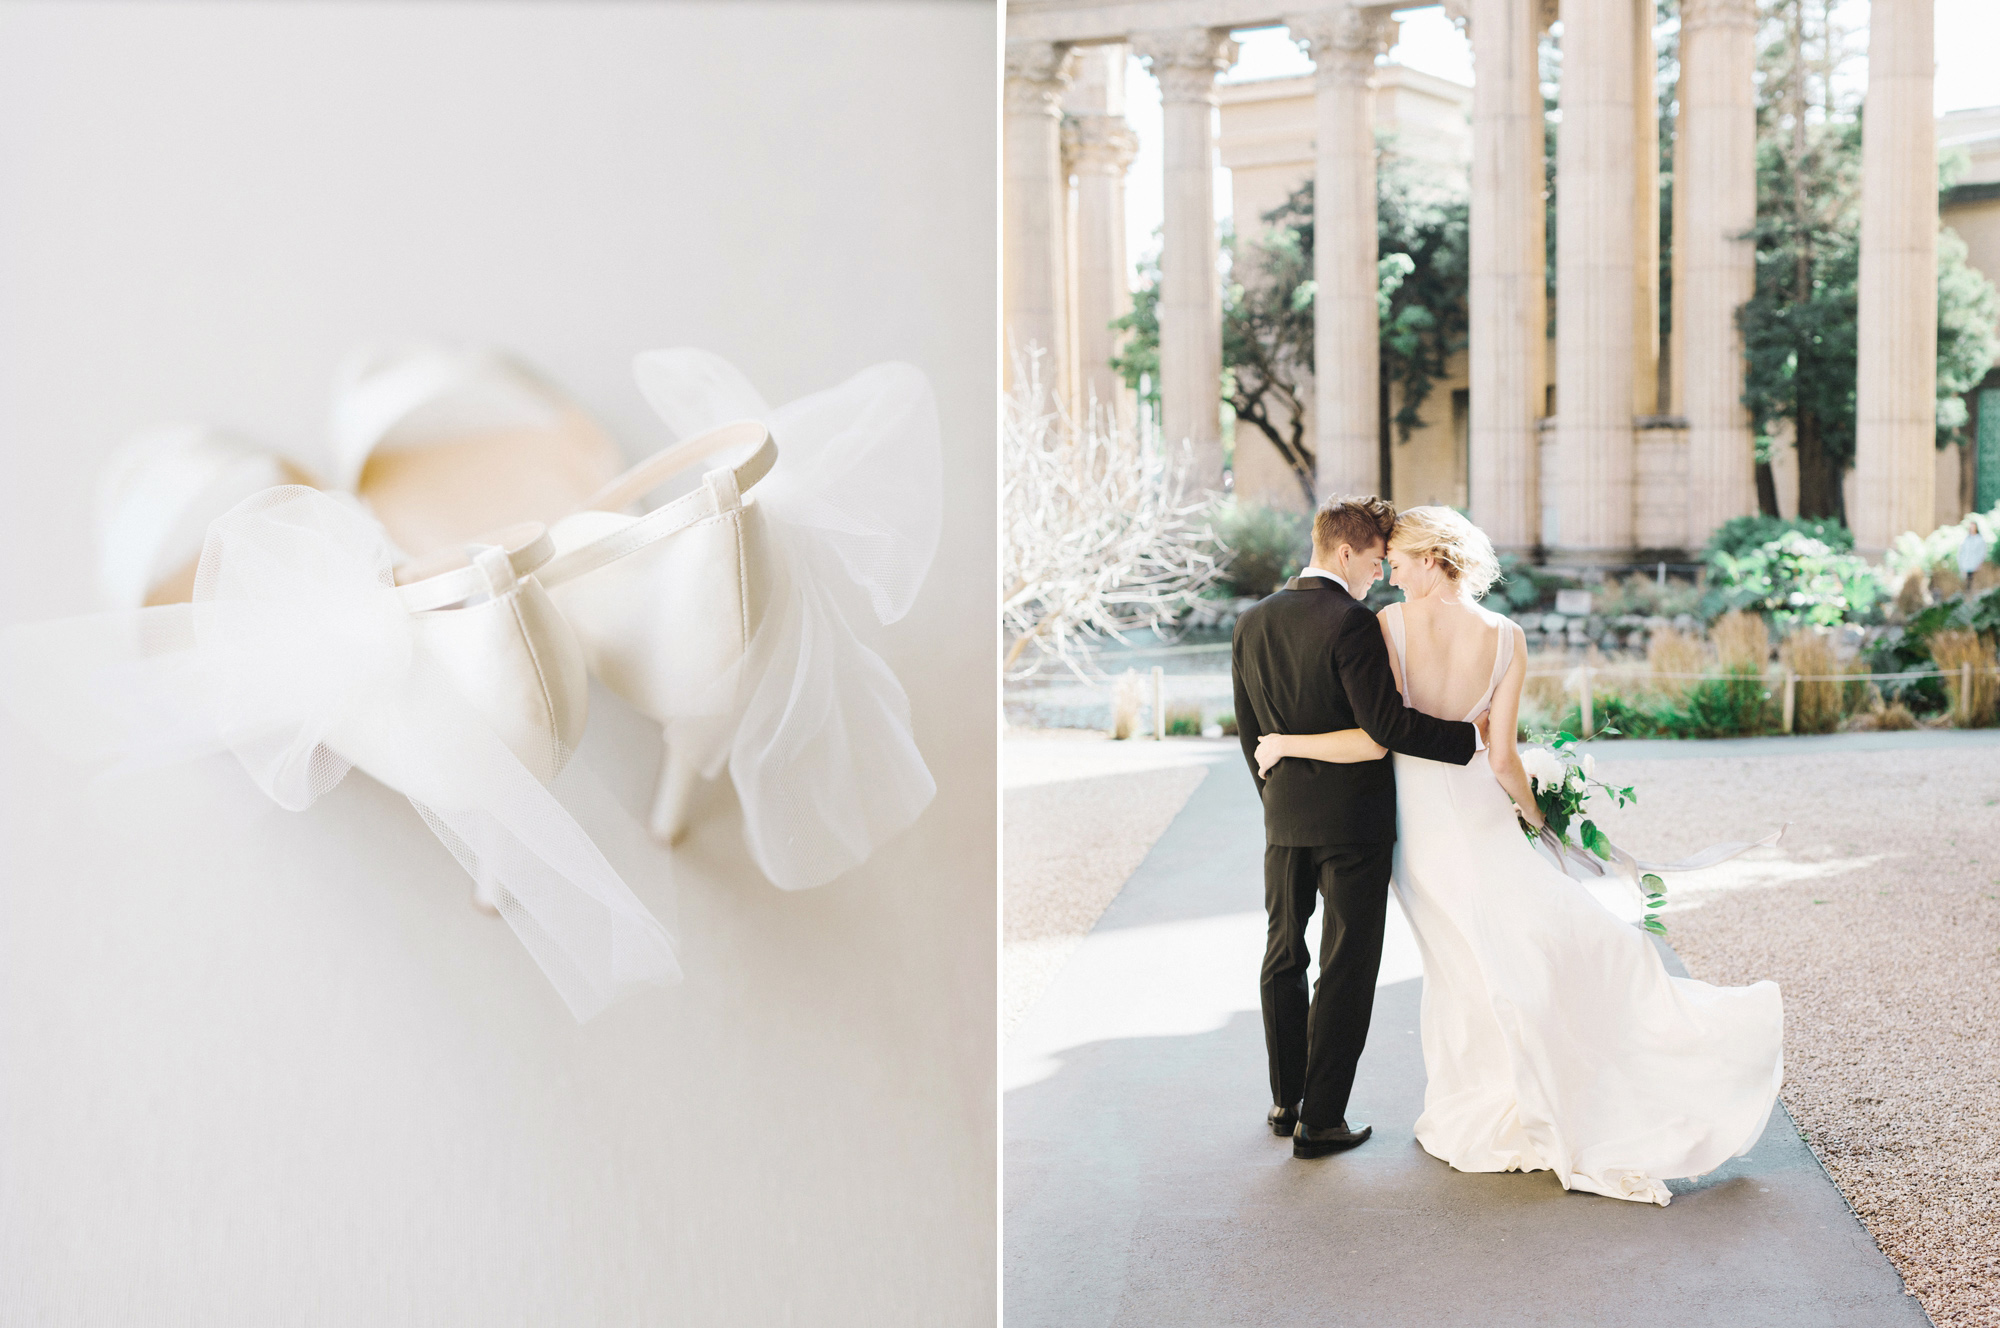 Romantic first look at the Palace of Fine Arts by Santa Barbara wedding photographer Tenth & Grace